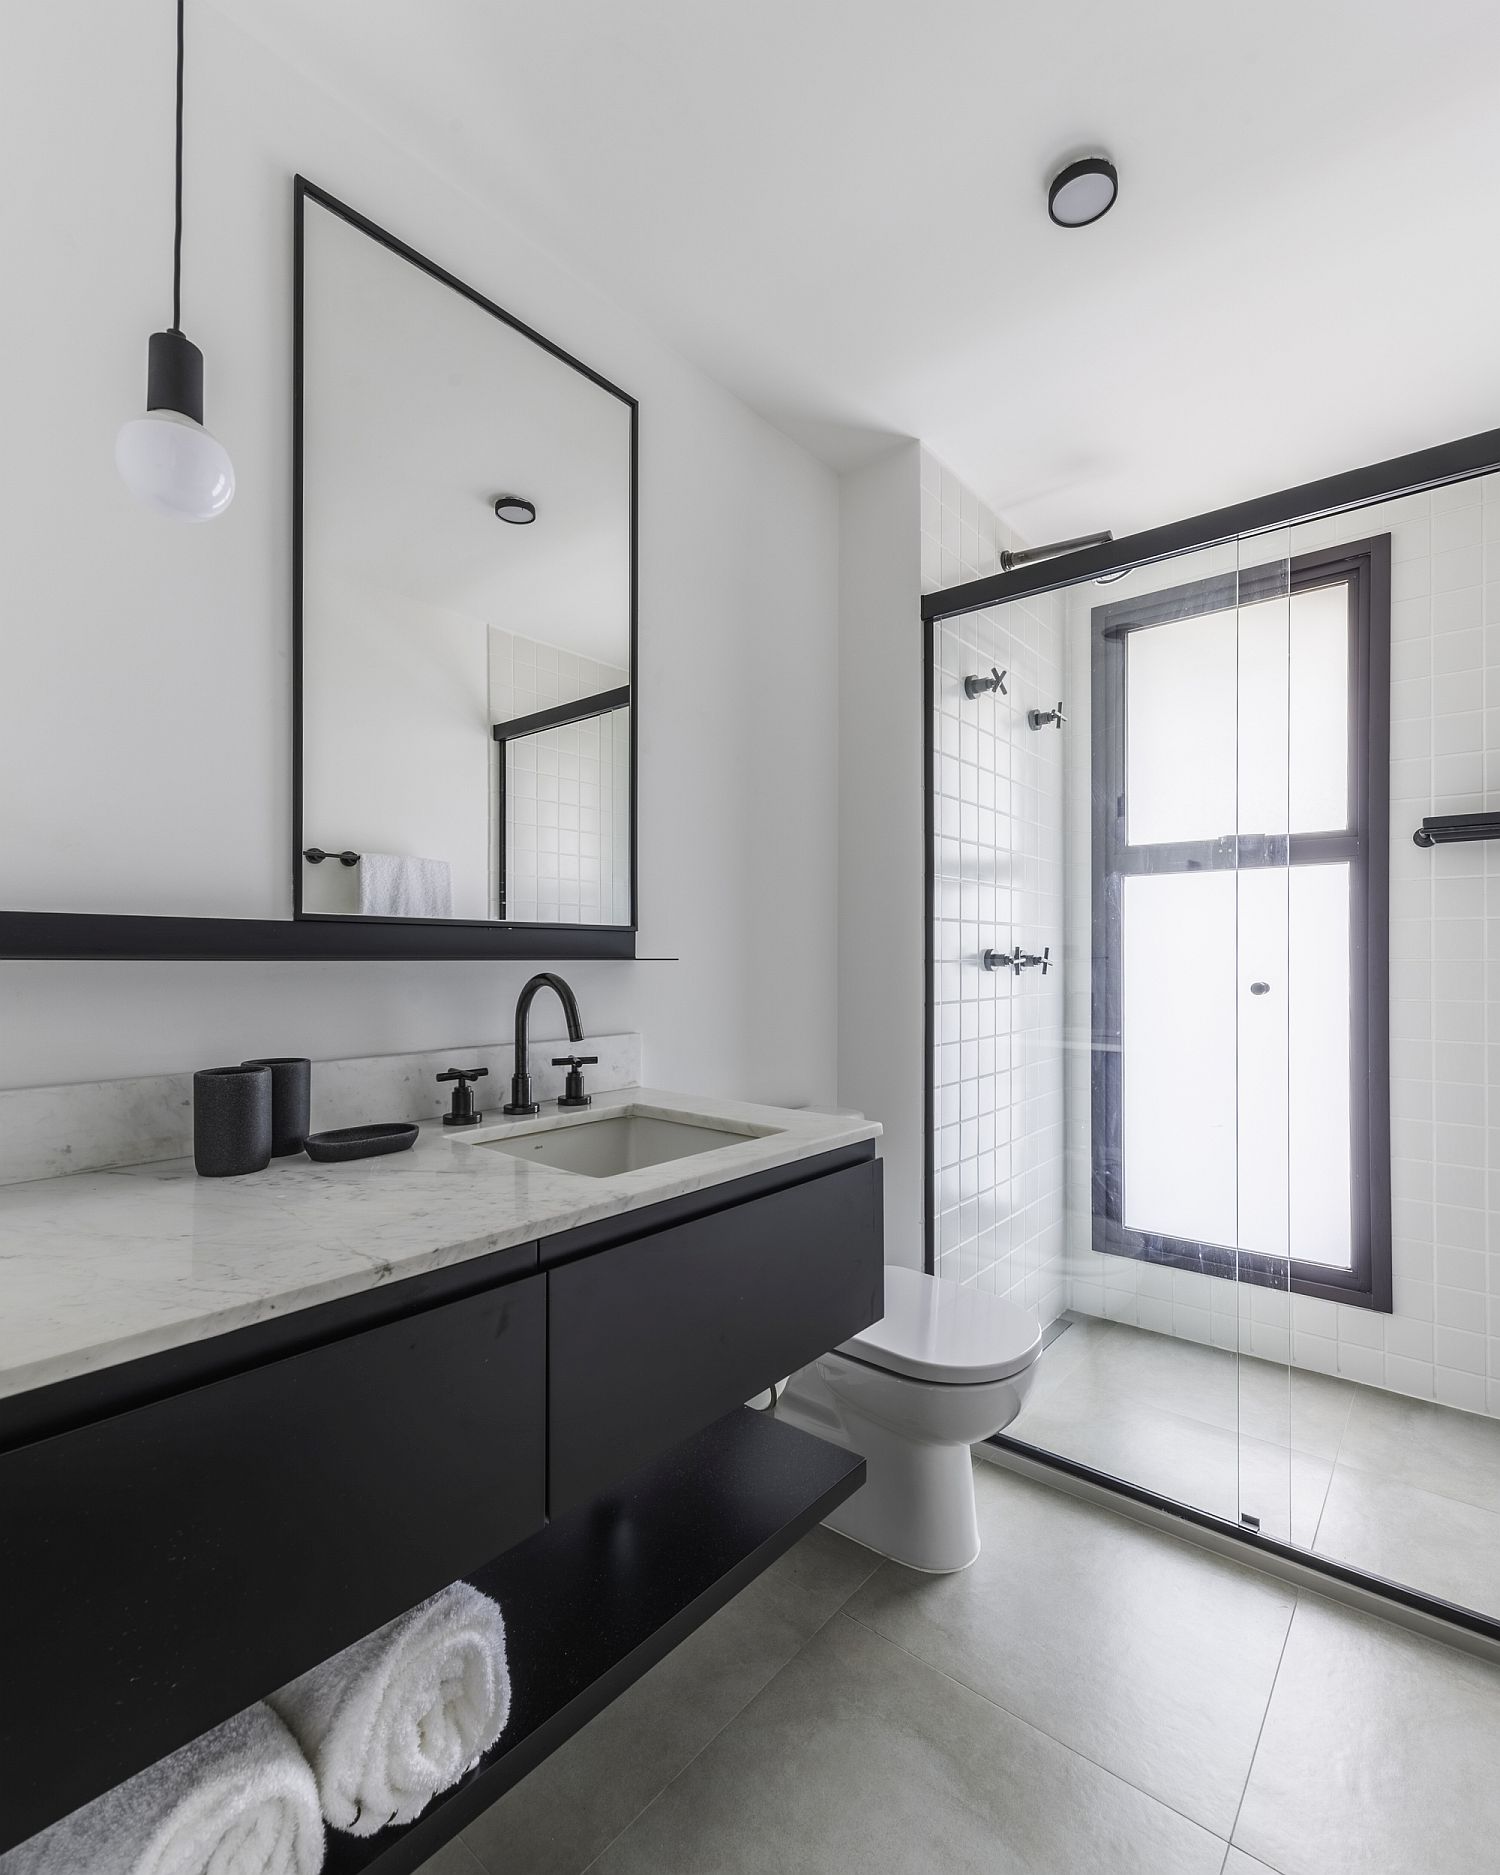 Modern and minimal bathroom in black and white with concrete finishes